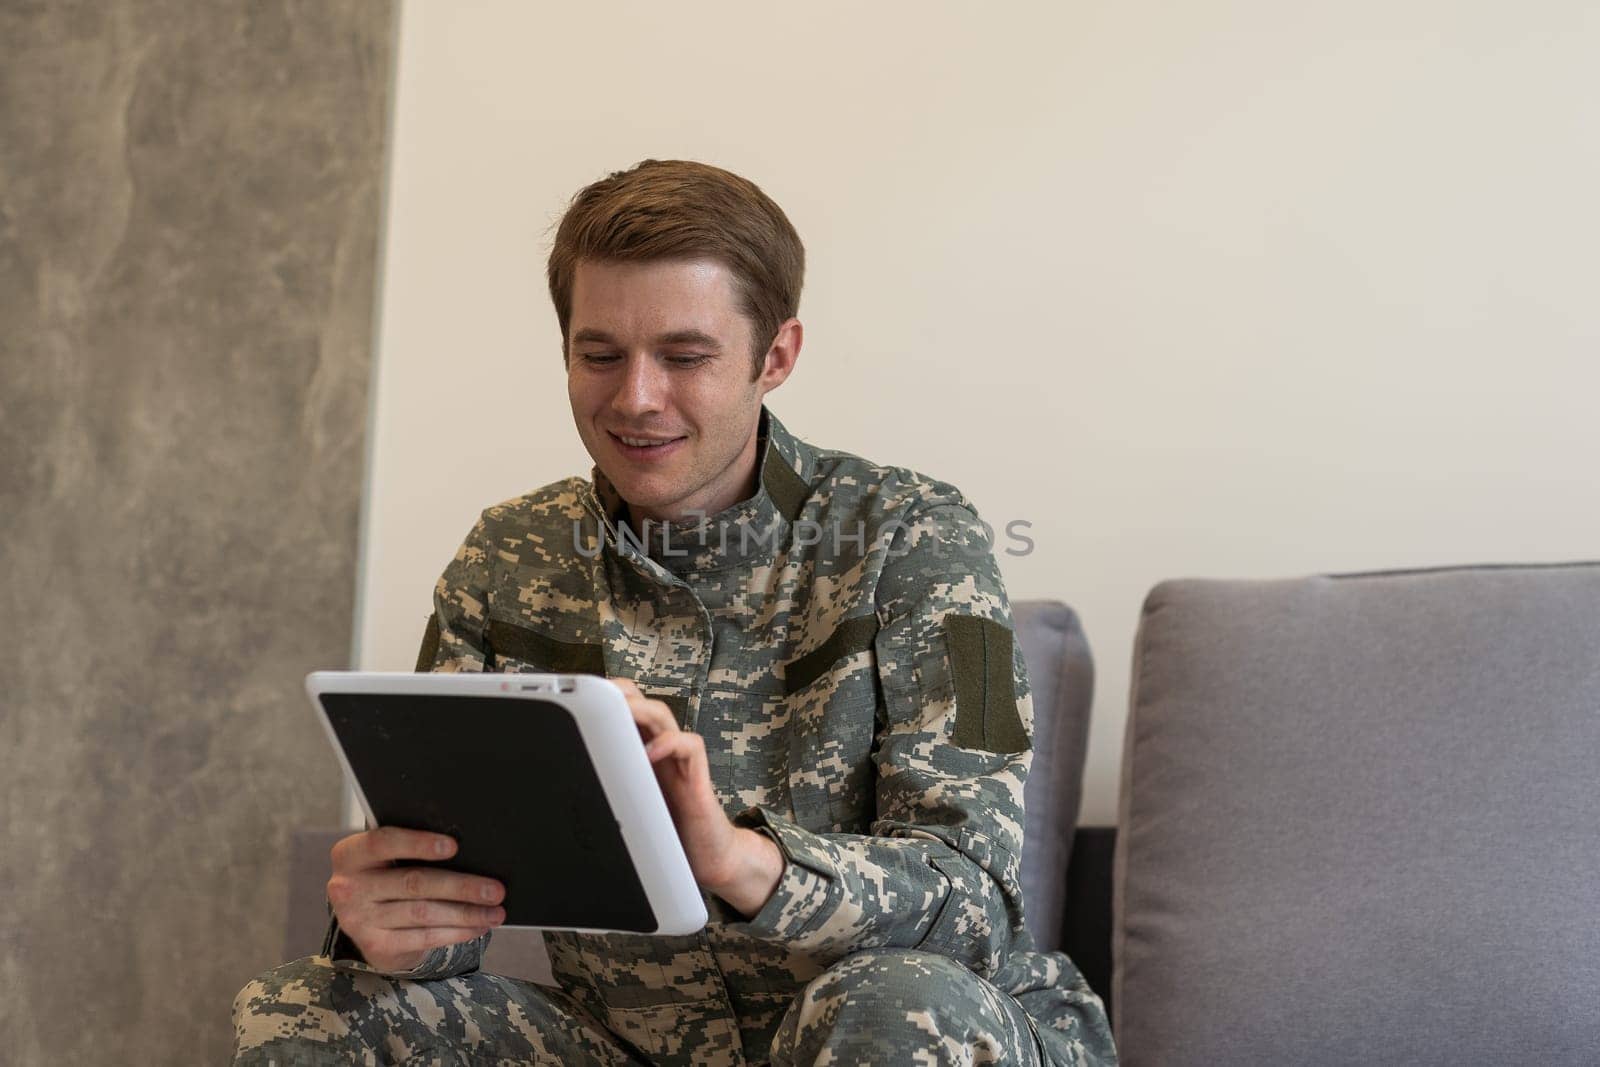 Military man waving. military man waving while having video chat with family on tablet.